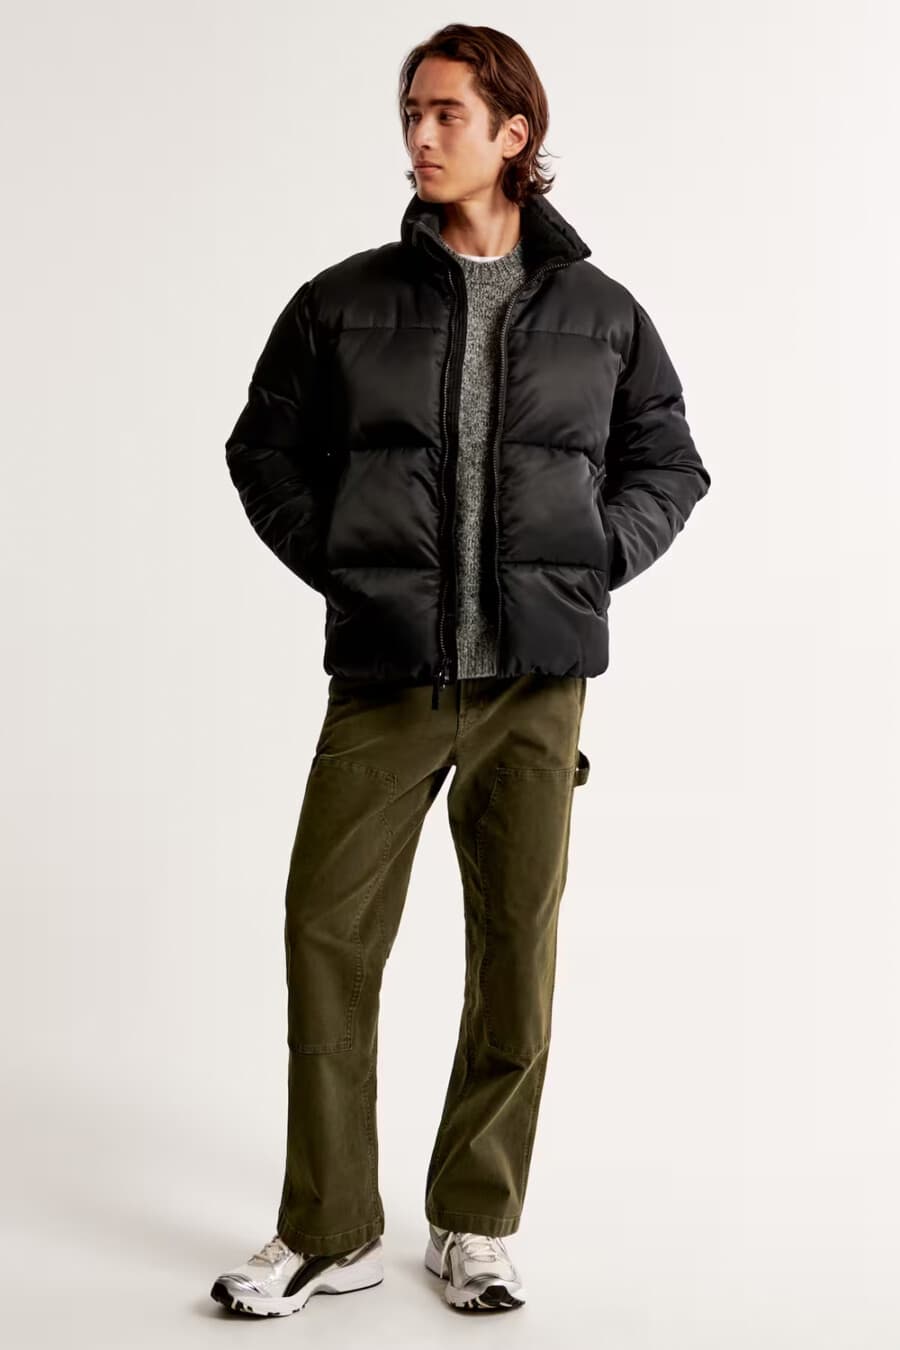 Men's green carpenter pants, white T-shirt, grey textured sweater, black puffer jacket and white/black sneakers outfit